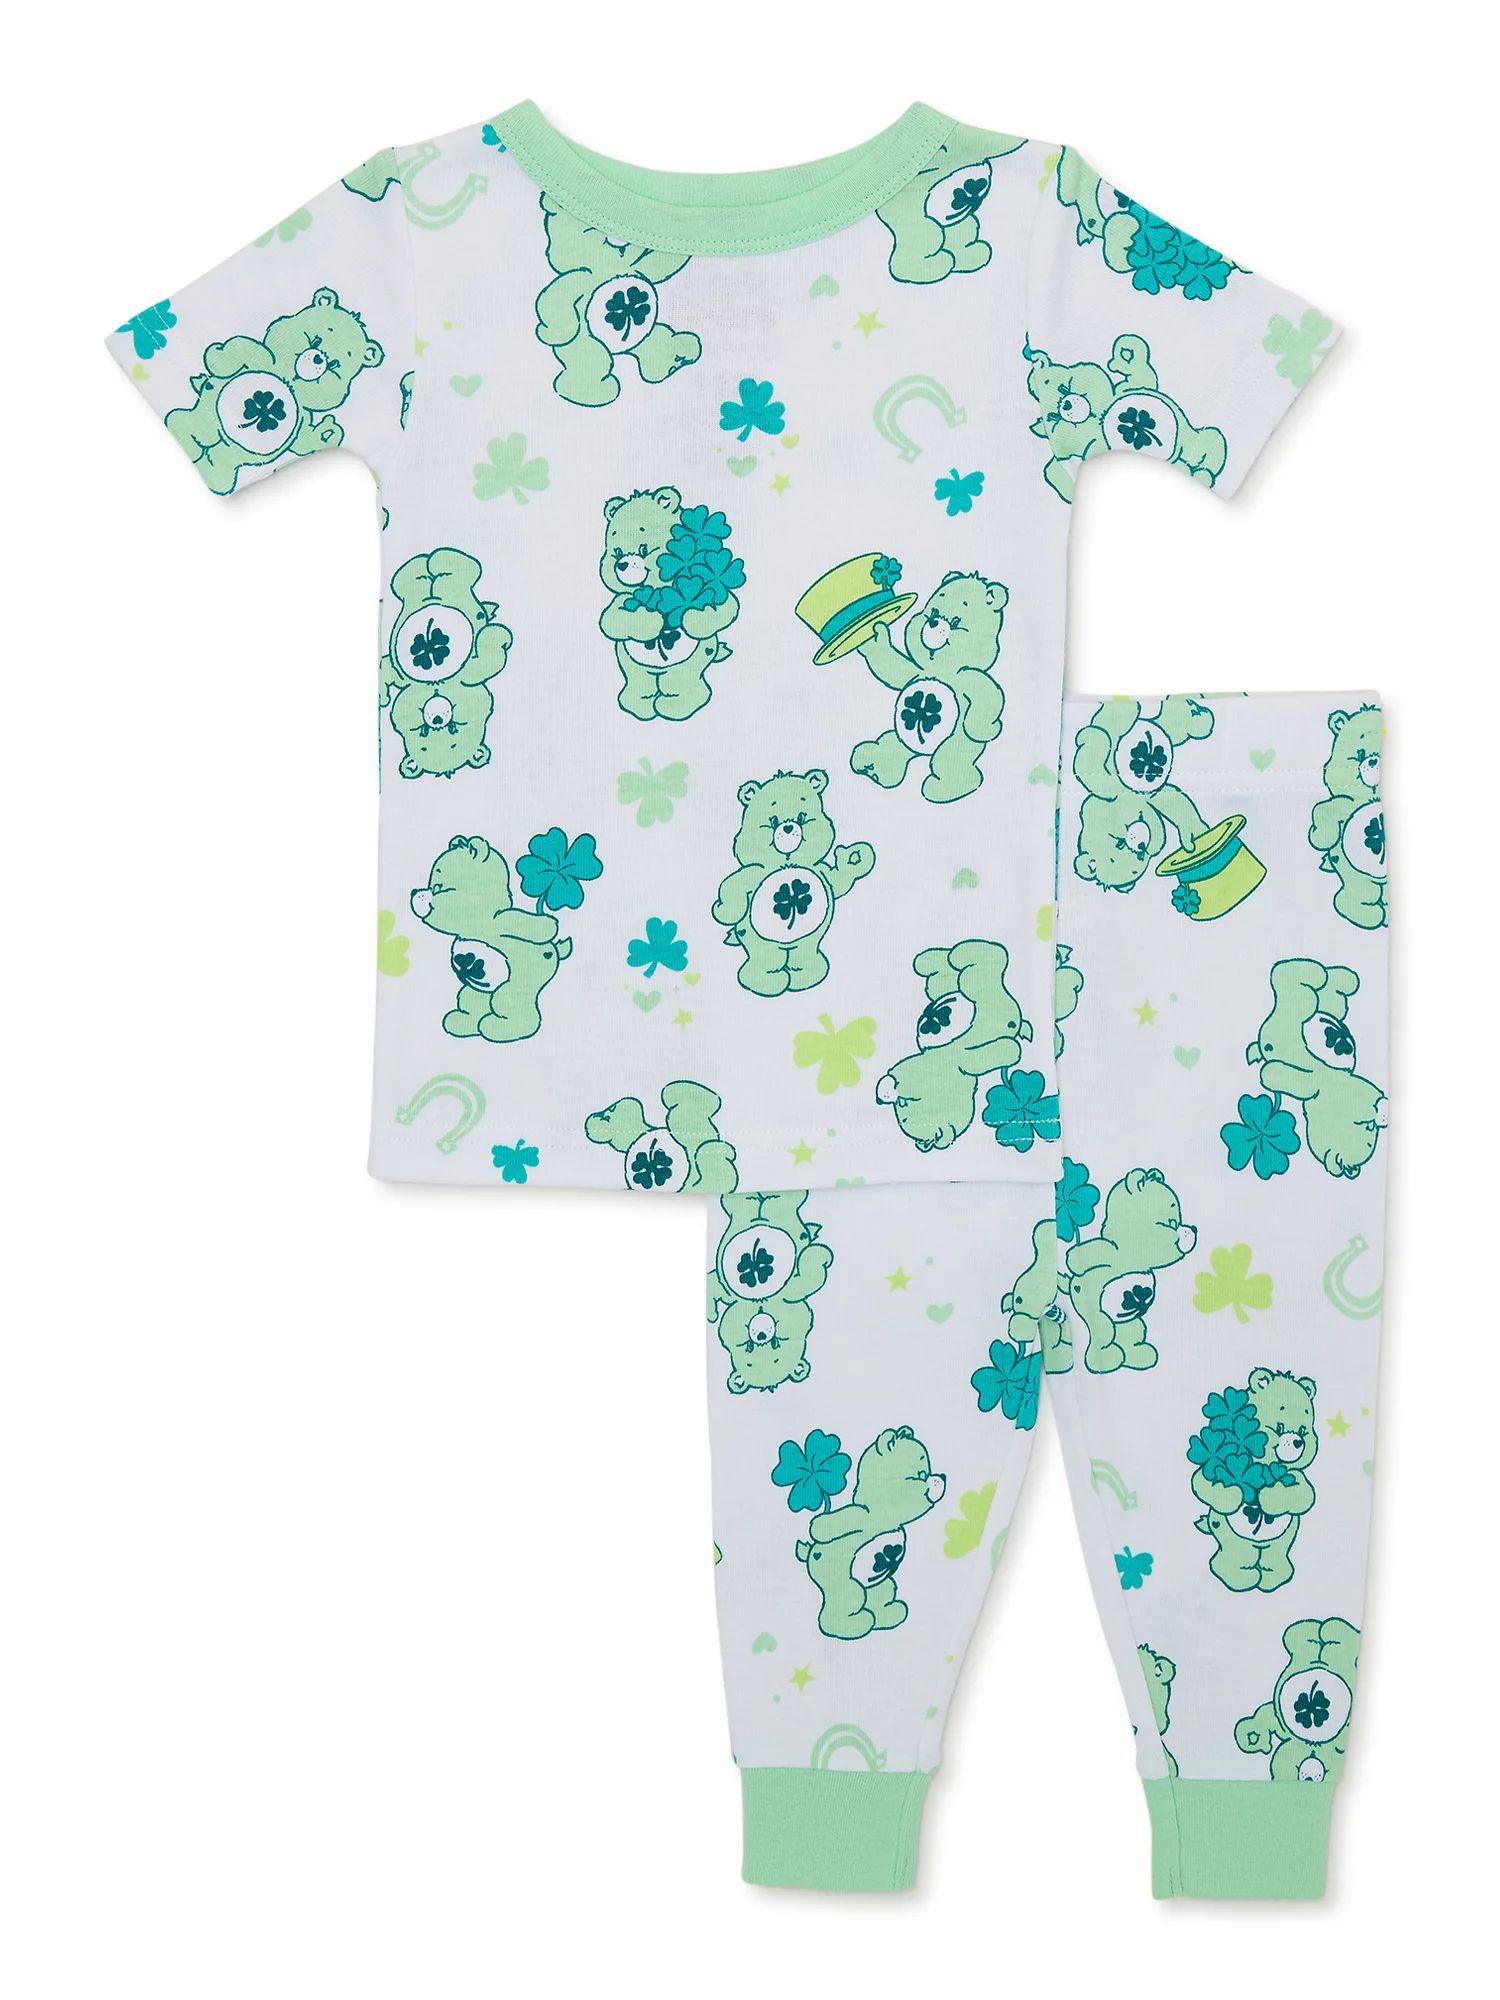 Care Bears Toddler Unisex St. Patrick's Day Short Sleeve Top and Pants, 2-Piece Pajama Set, Sizes... | Walmart (US)